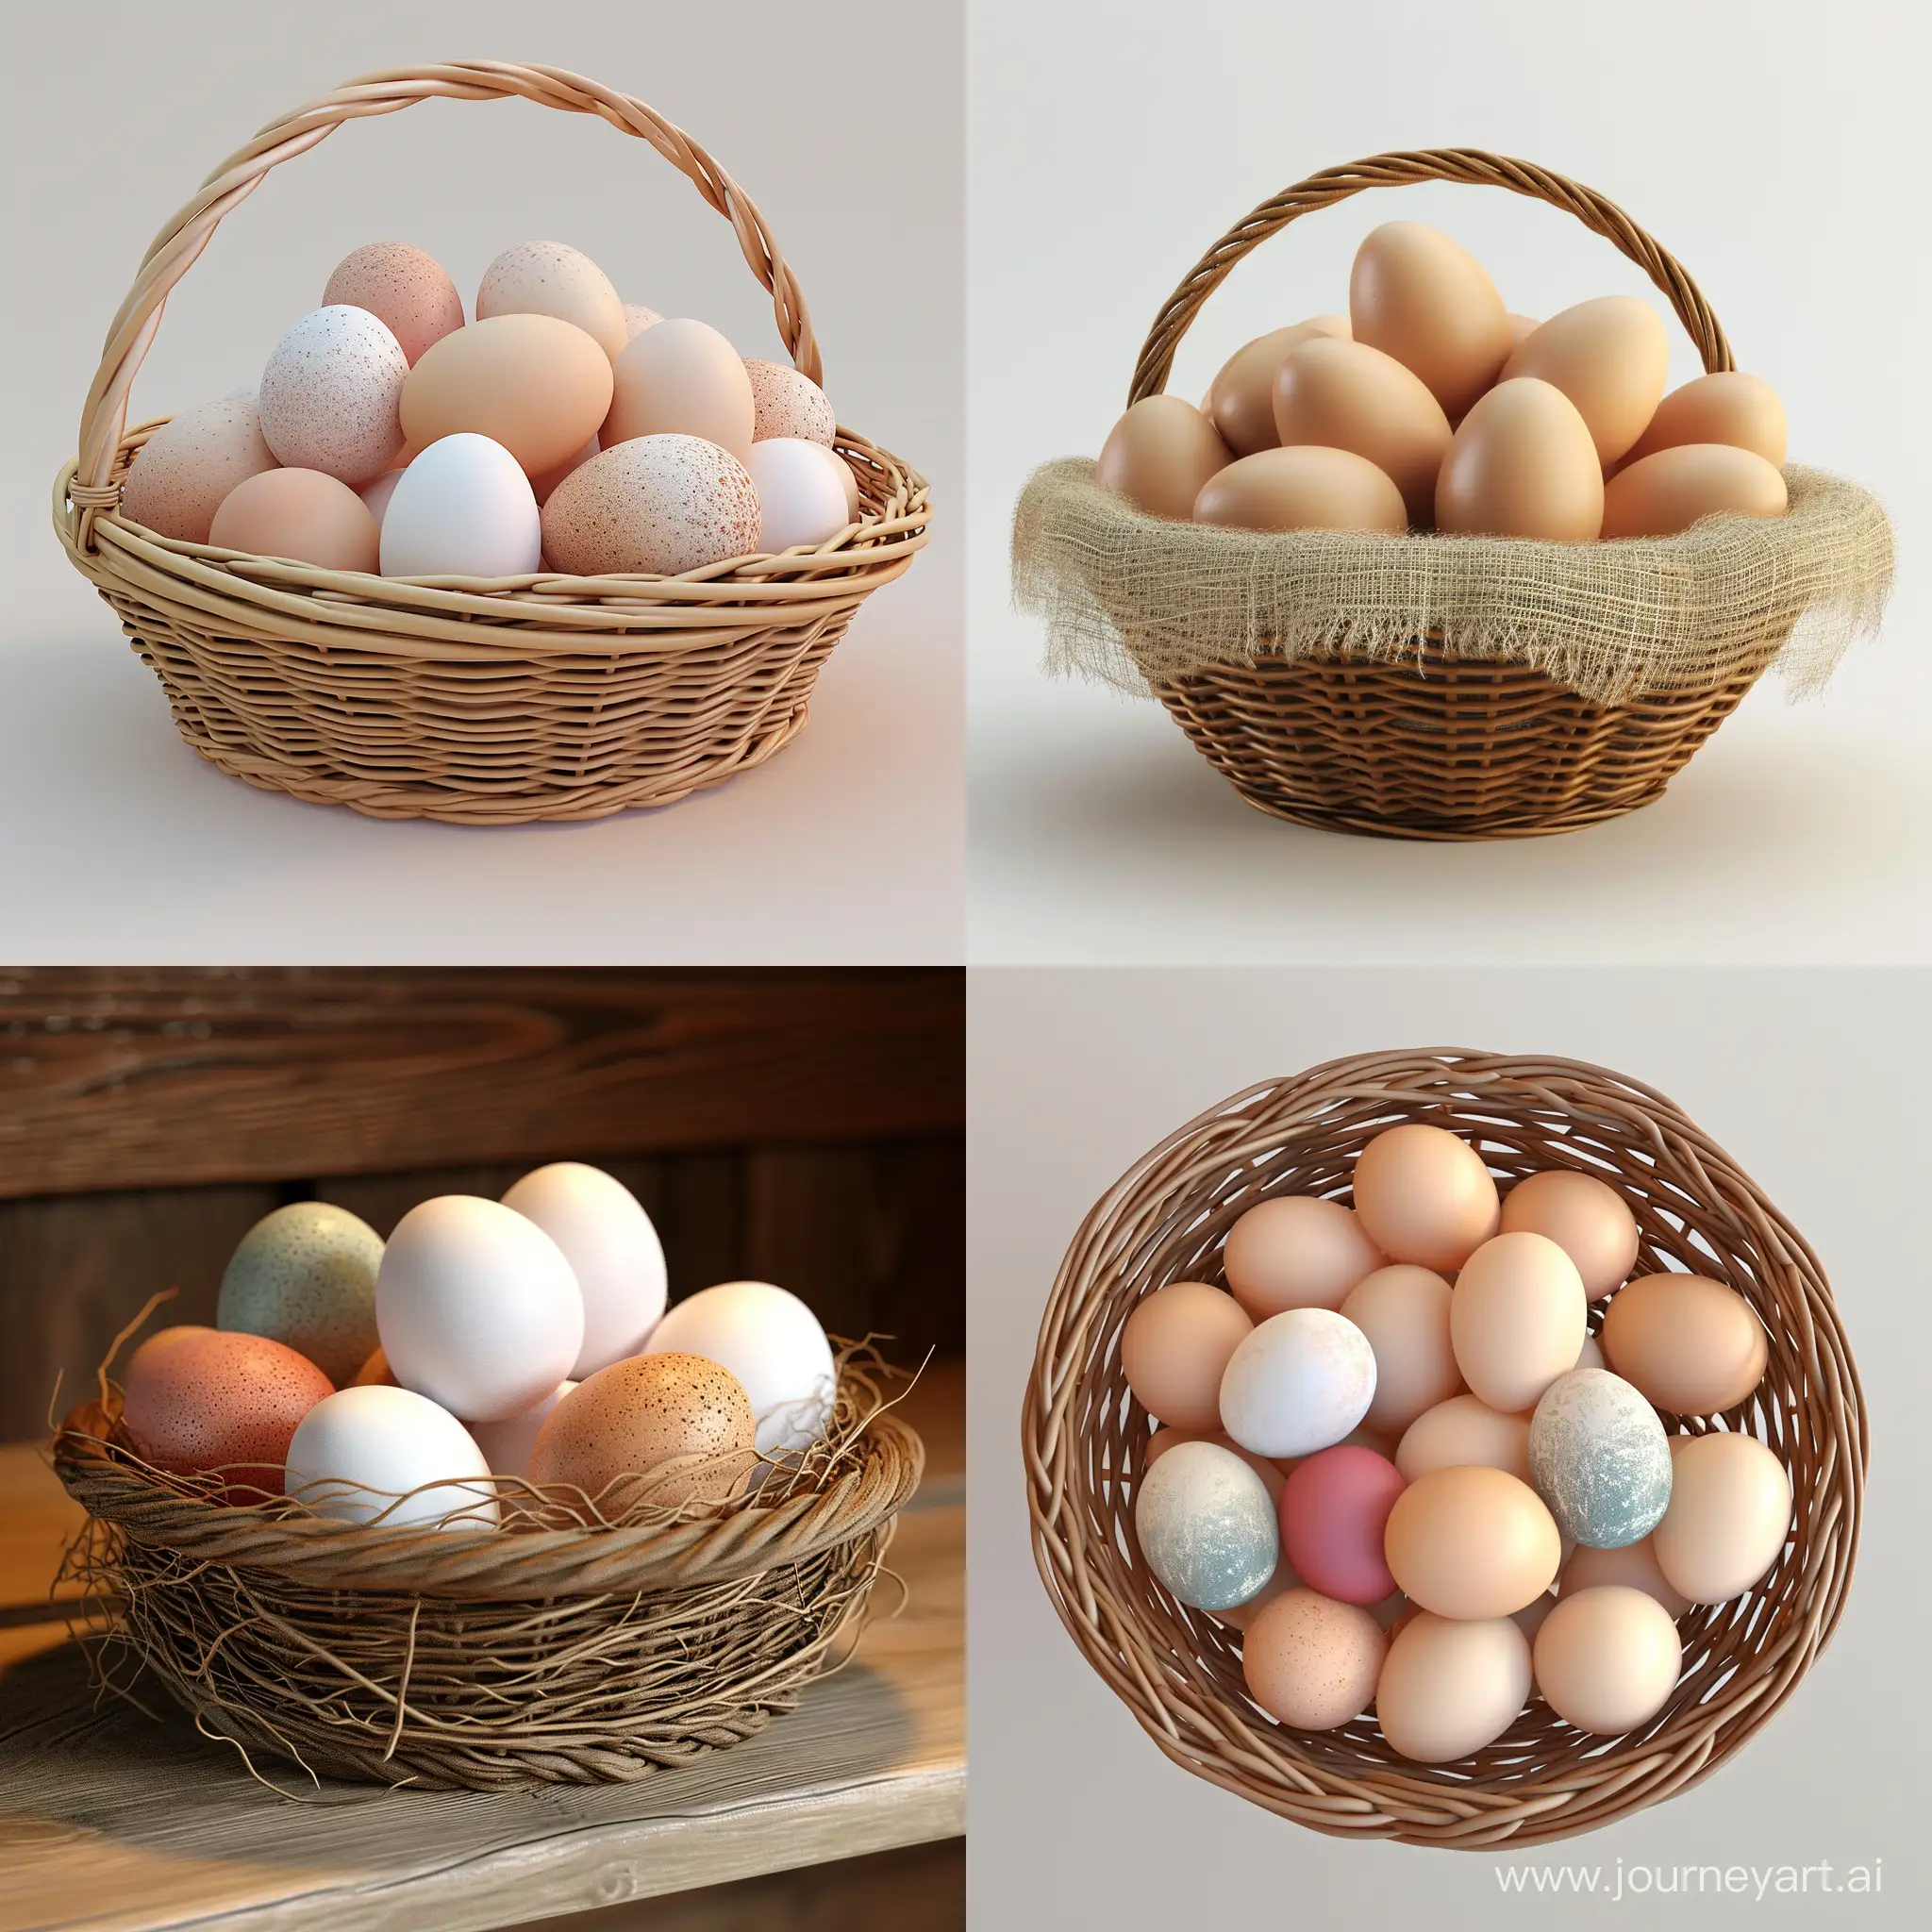 Vibrant-3D-Animation-of-a-Basket-of-Chicken-Eggs